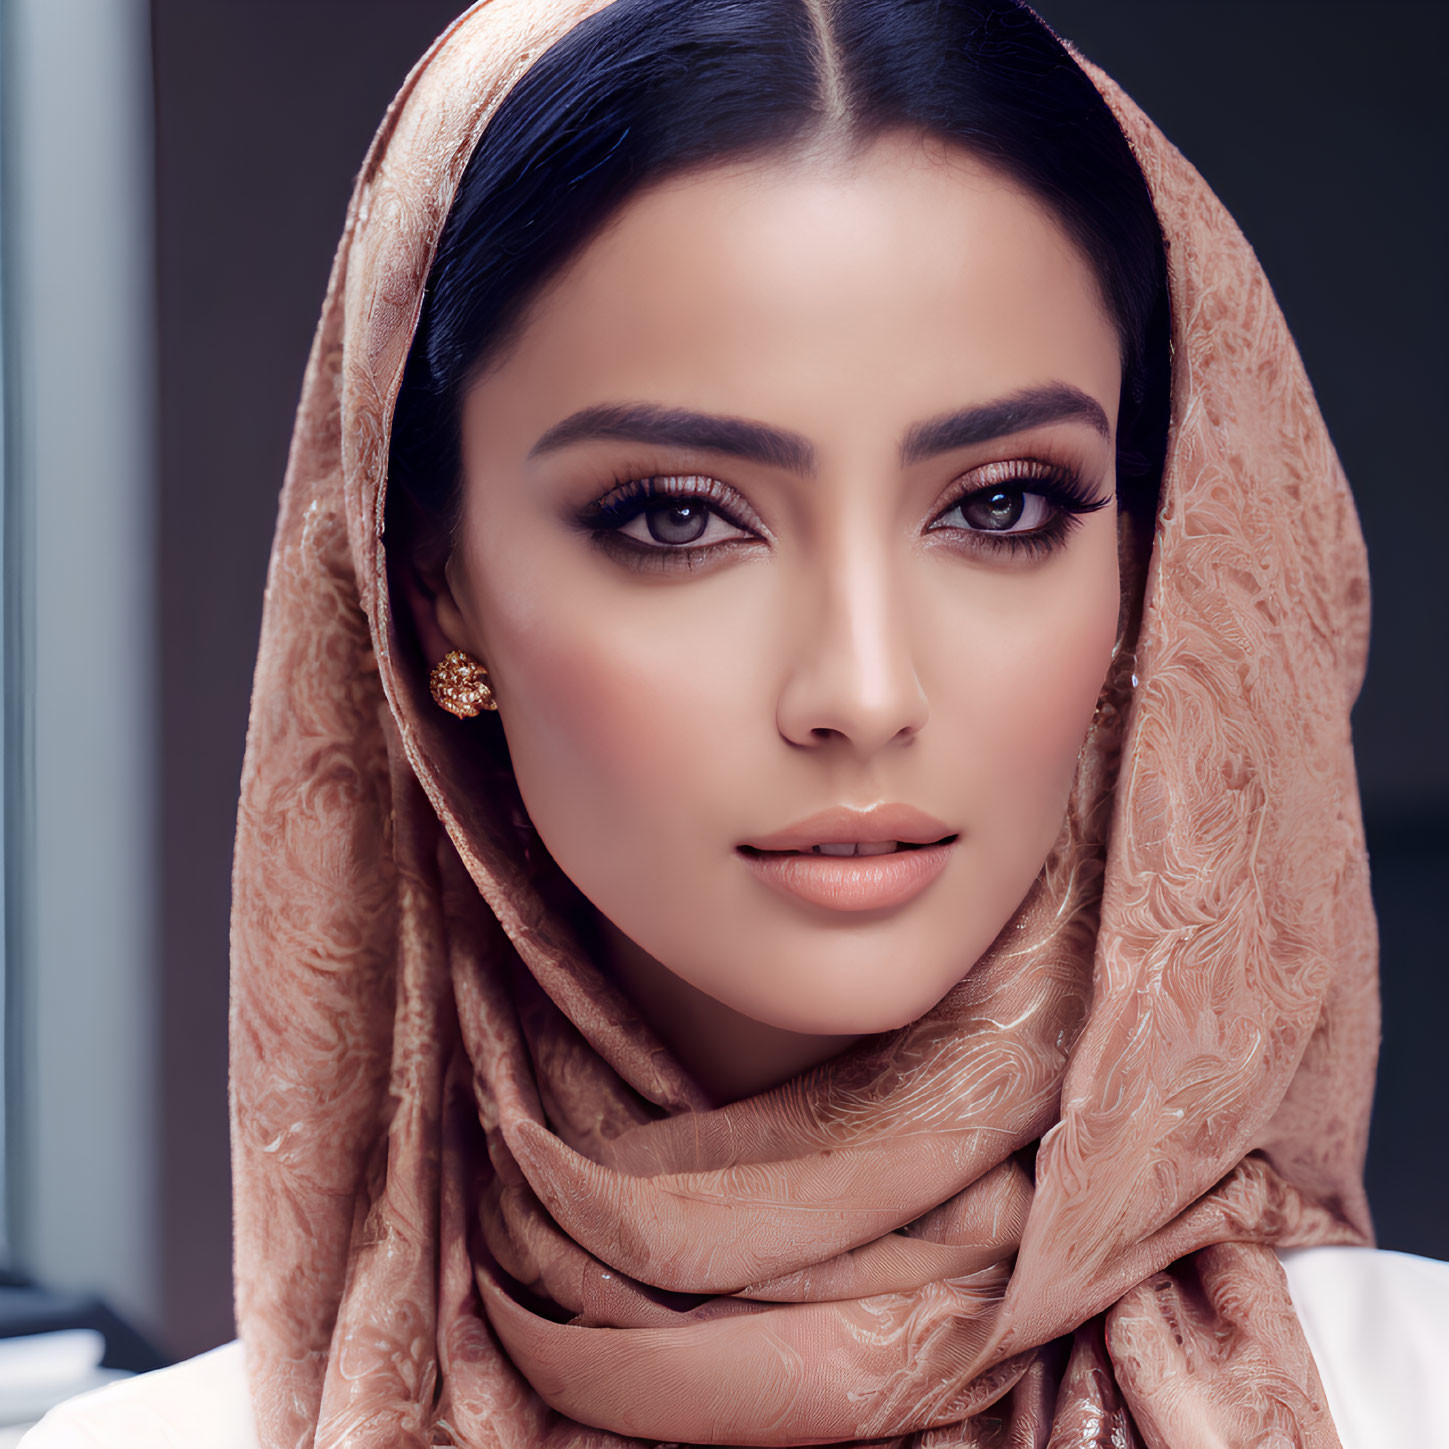 Dark-haired woman in beige hijab with gold earrings and striking eyes gazes at camera